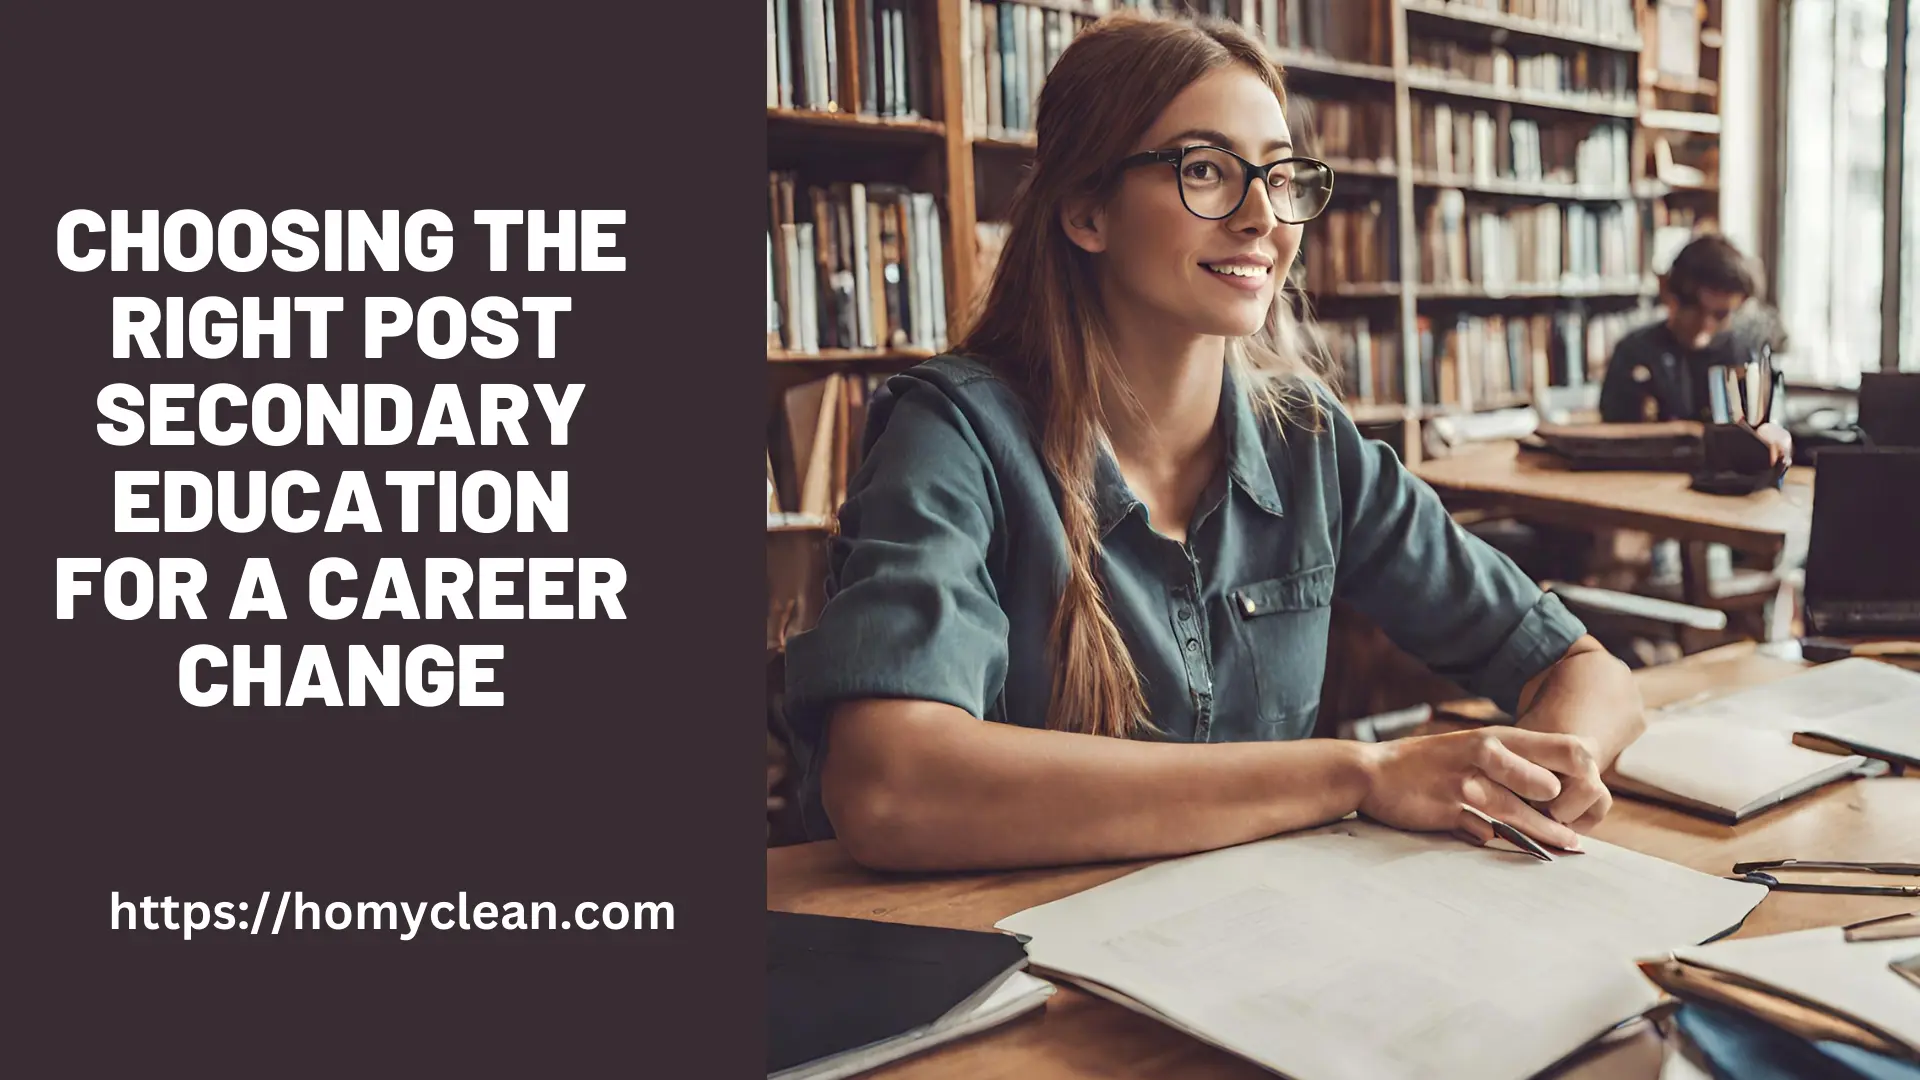 Choosing the right post secondary education for a career change